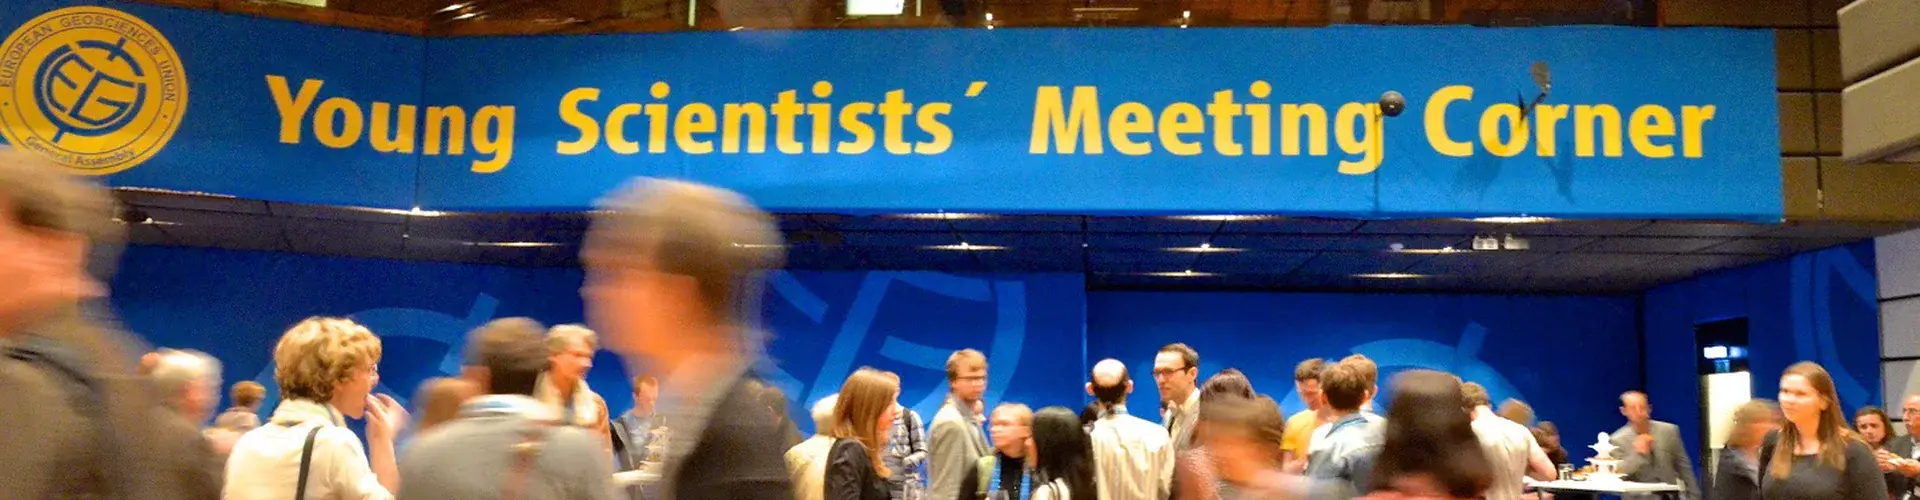 The Young Scientists' Meeting Corner at the EGU 2015 General Assembly will become the Early Career Scientists' Meeting Corner in 2016. (Credit: EGU/Stephanie McClellan)